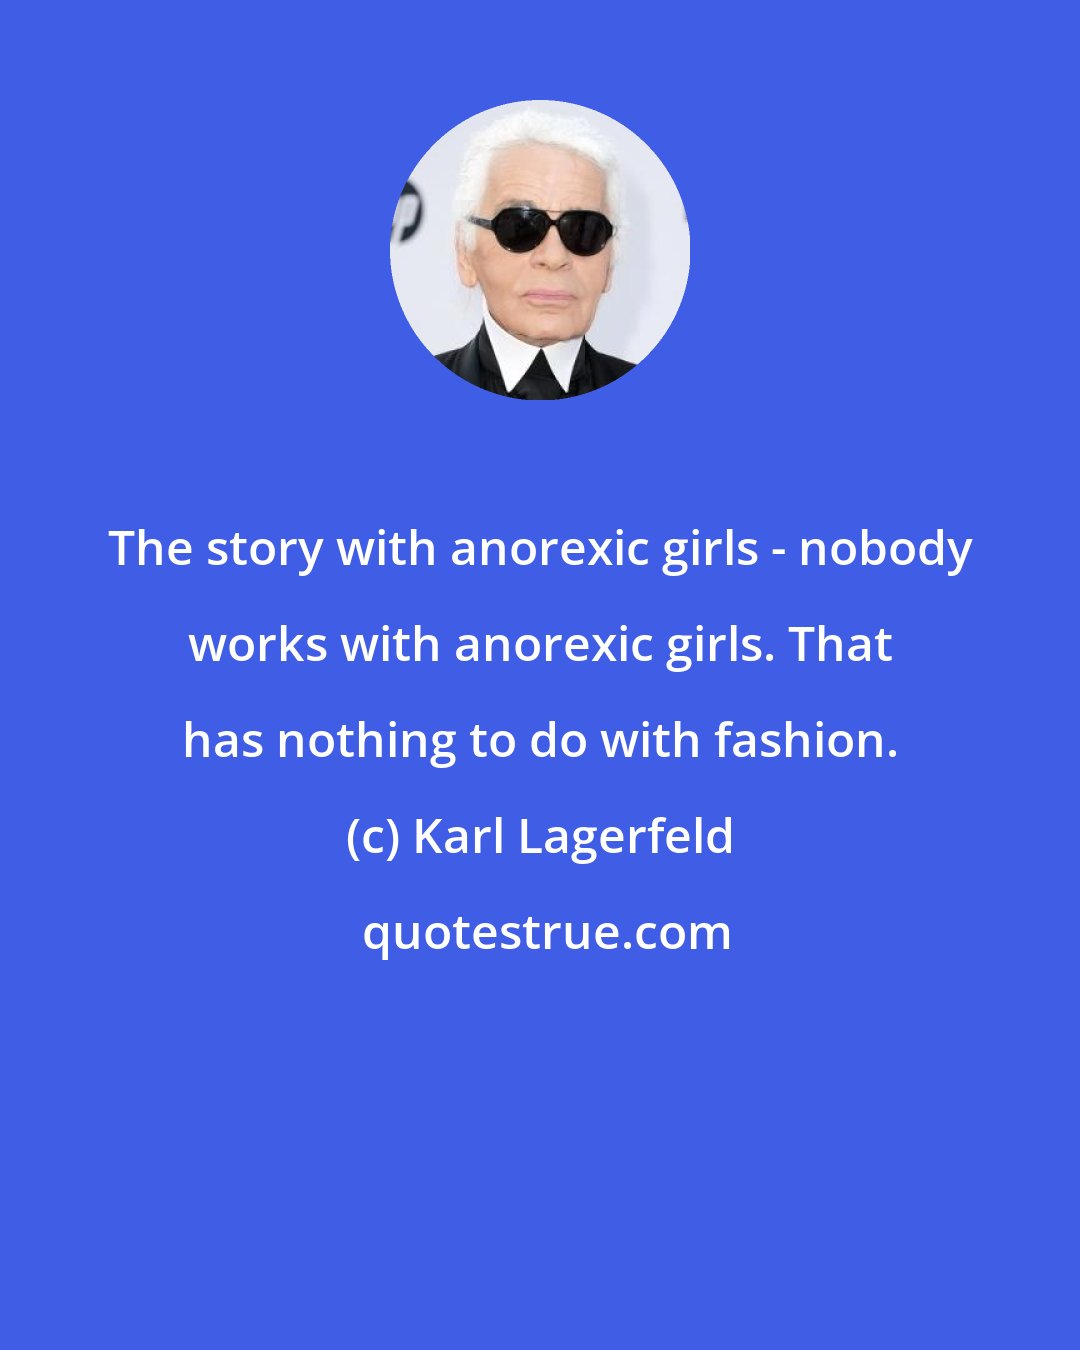 Karl Lagerfeld: The story with anorexic girls - nobody works with anorexic girls. That has nothing to do with fashion.